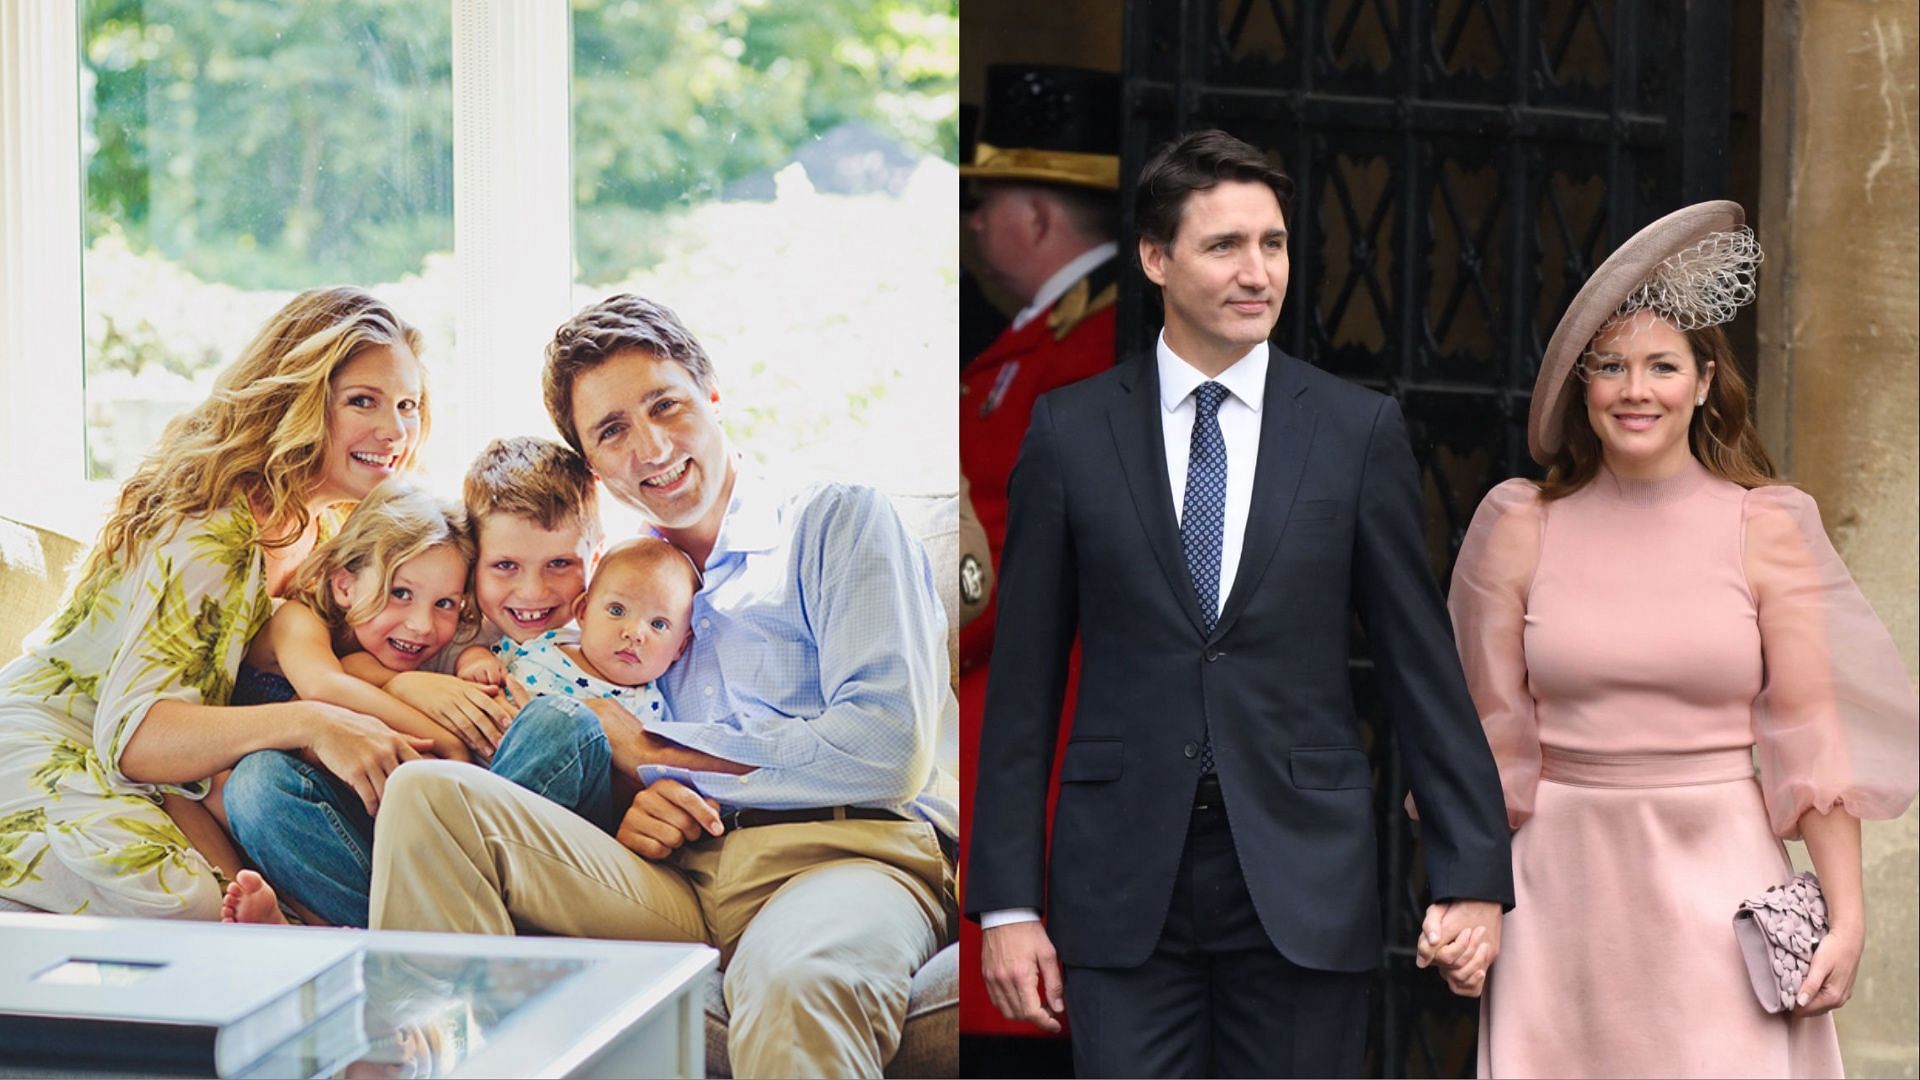 Justin Trudeau has separated from his wife Sophie. (Images via photographer Maude Chauvin &amp; Getty Images)